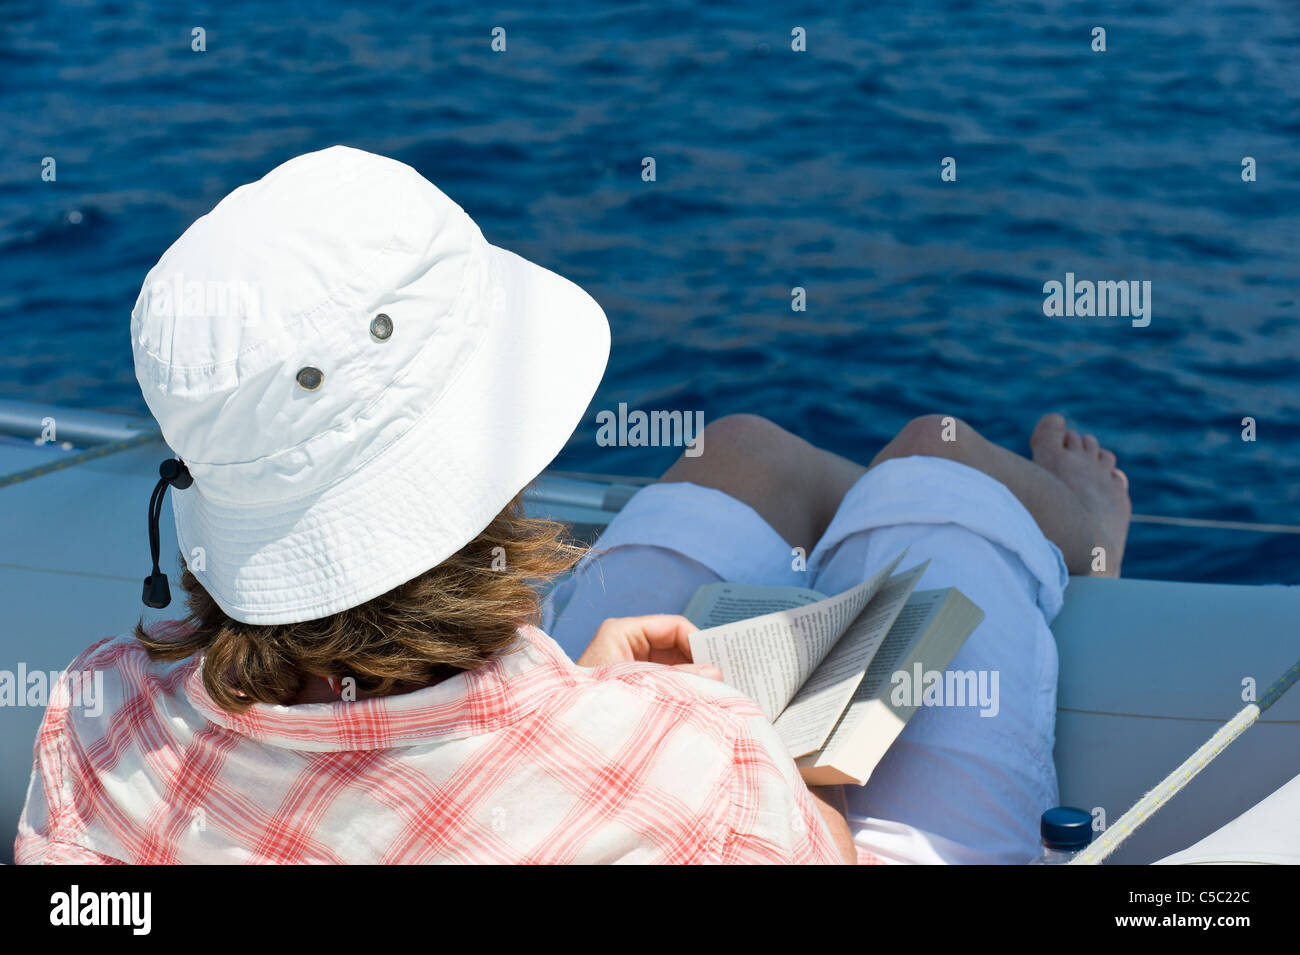 Rear view of a roman reading book on the boat Stock Photo